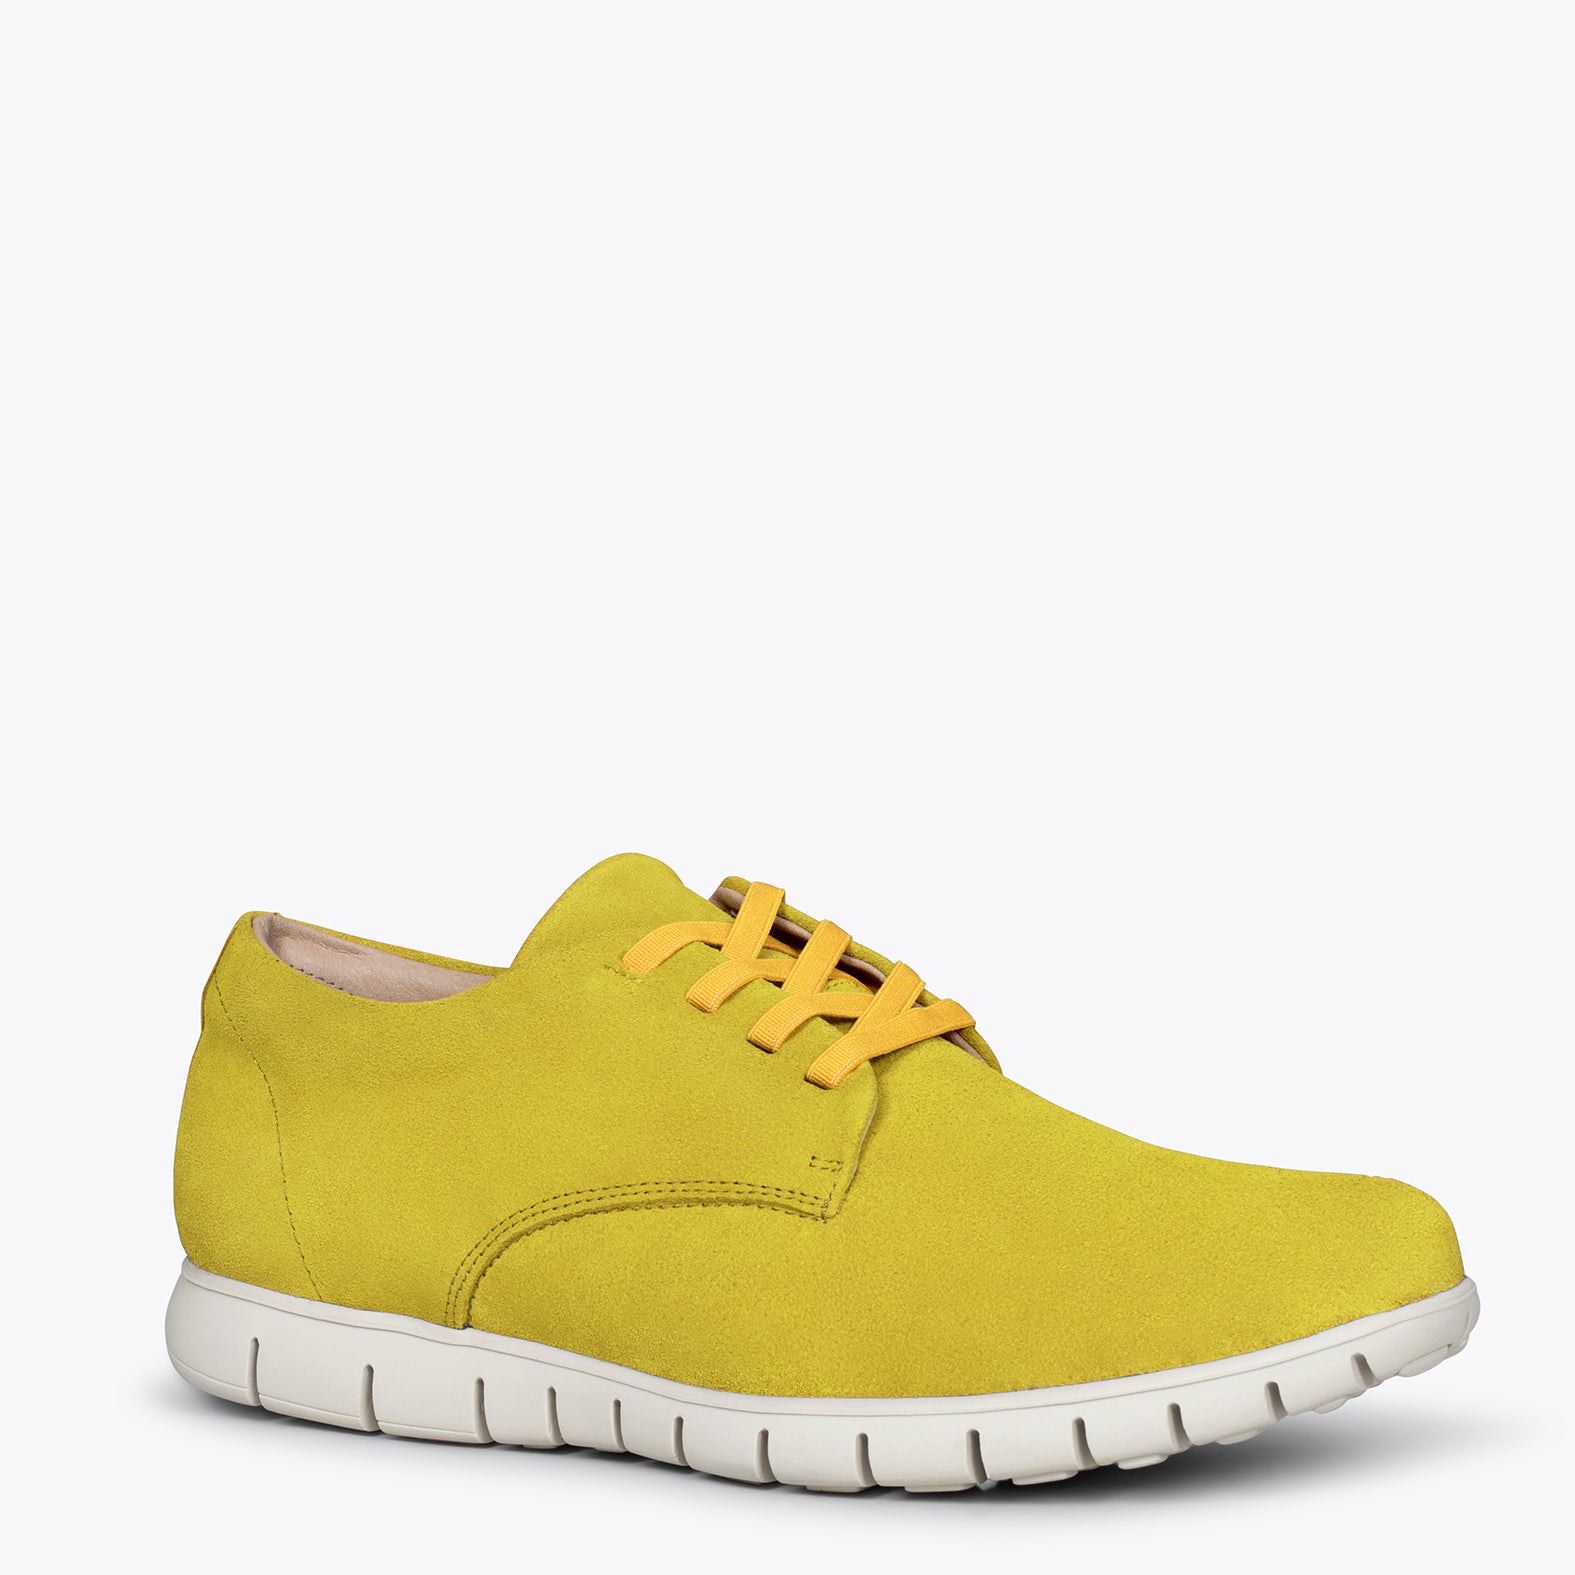 360 - Chaussures sportives pour homme JAUNE